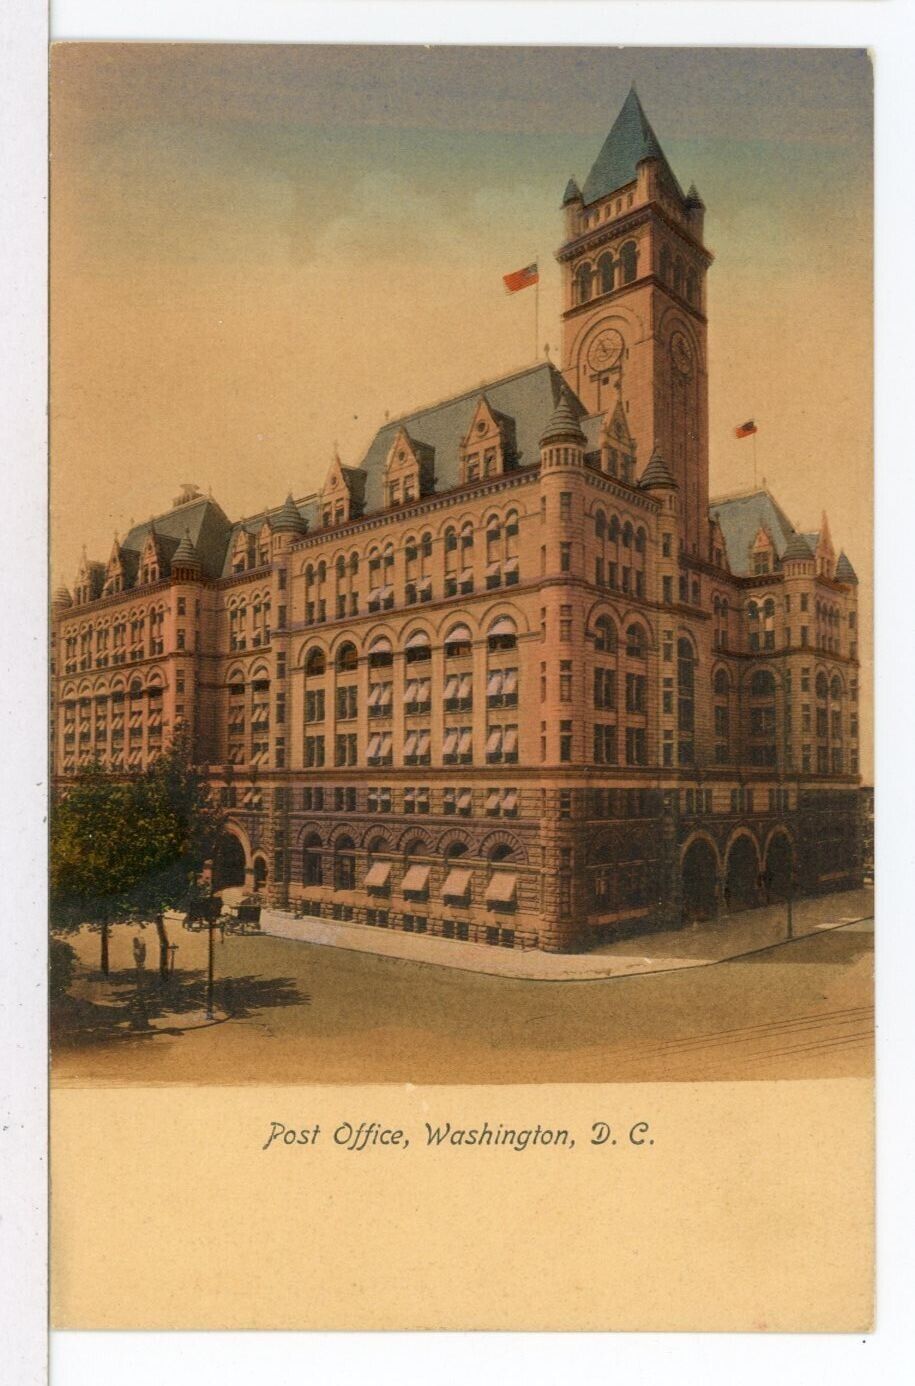 Unusual Early Colored Card, Post Office, Washington, D. C. 1901 - 1907 Postcard